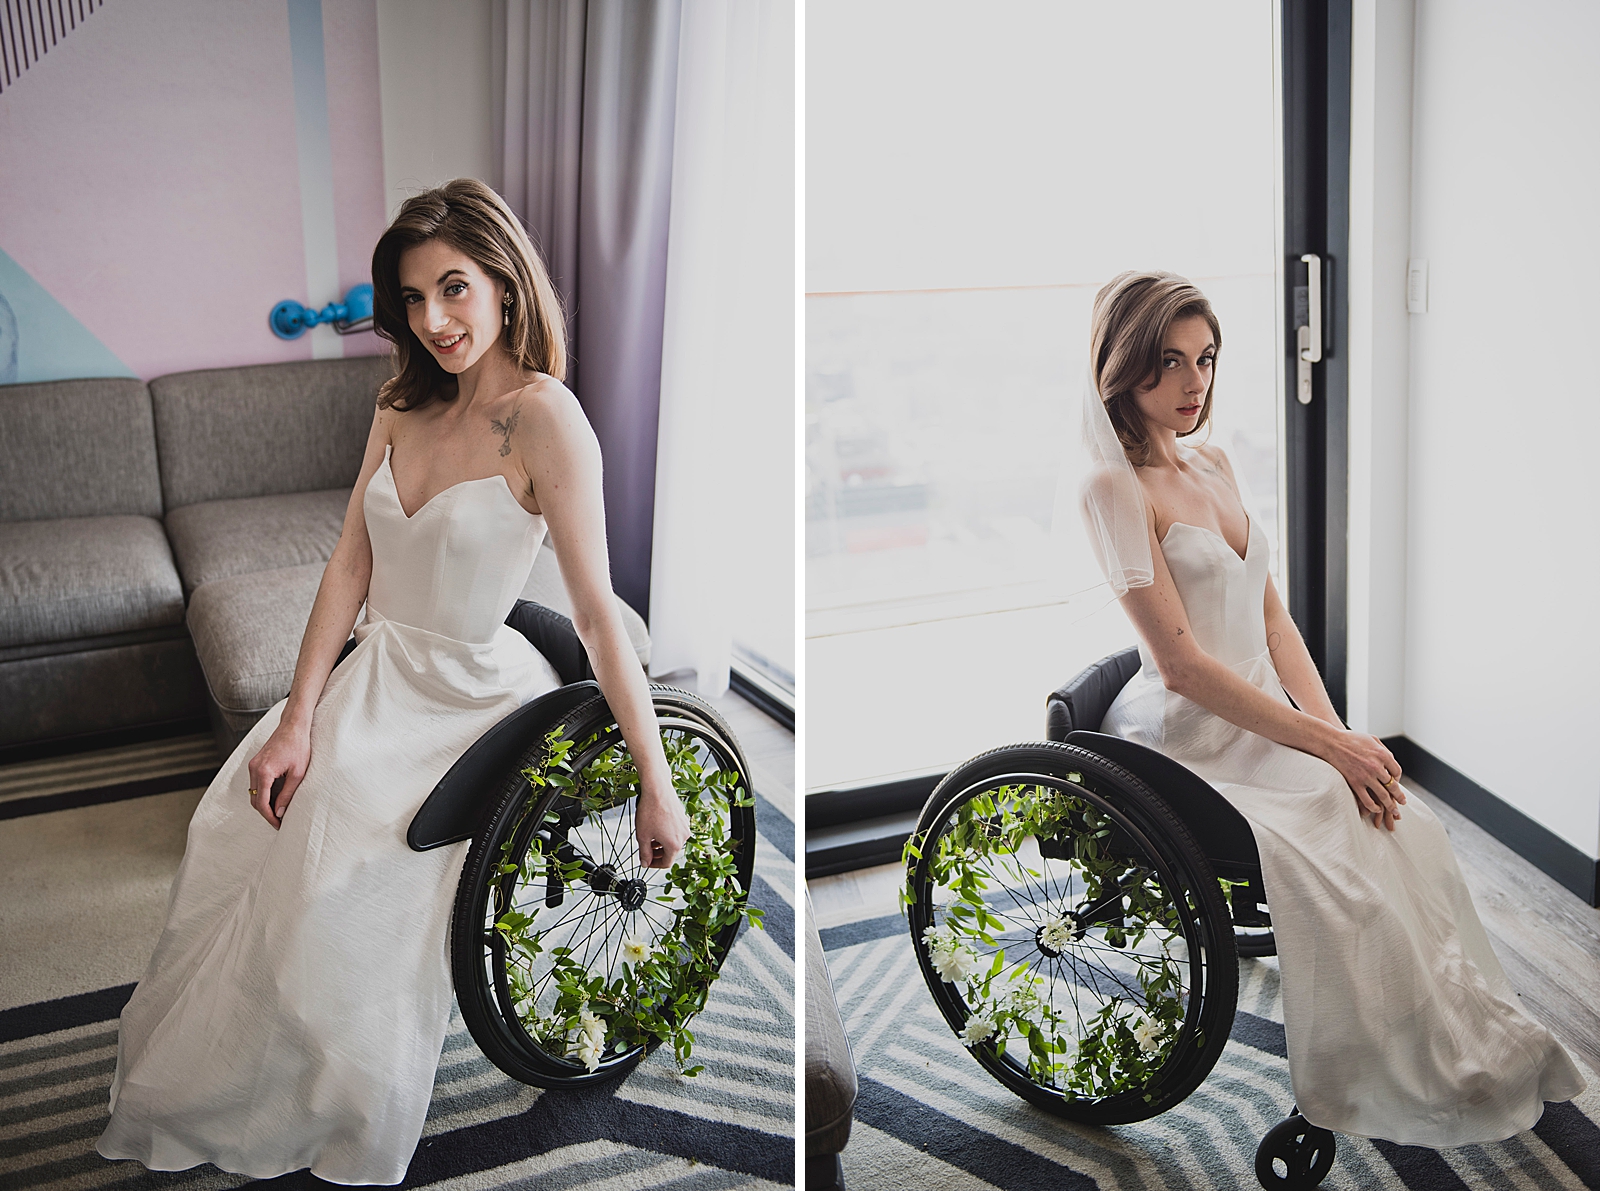 Left photo: Shot of the bride smiling in her wedding dress as she sits in her decorated wheelchair. 
Right photo: Full body shot of the bride in her wedding dress posing for the camera as she sits in her decorated wheelchair. 